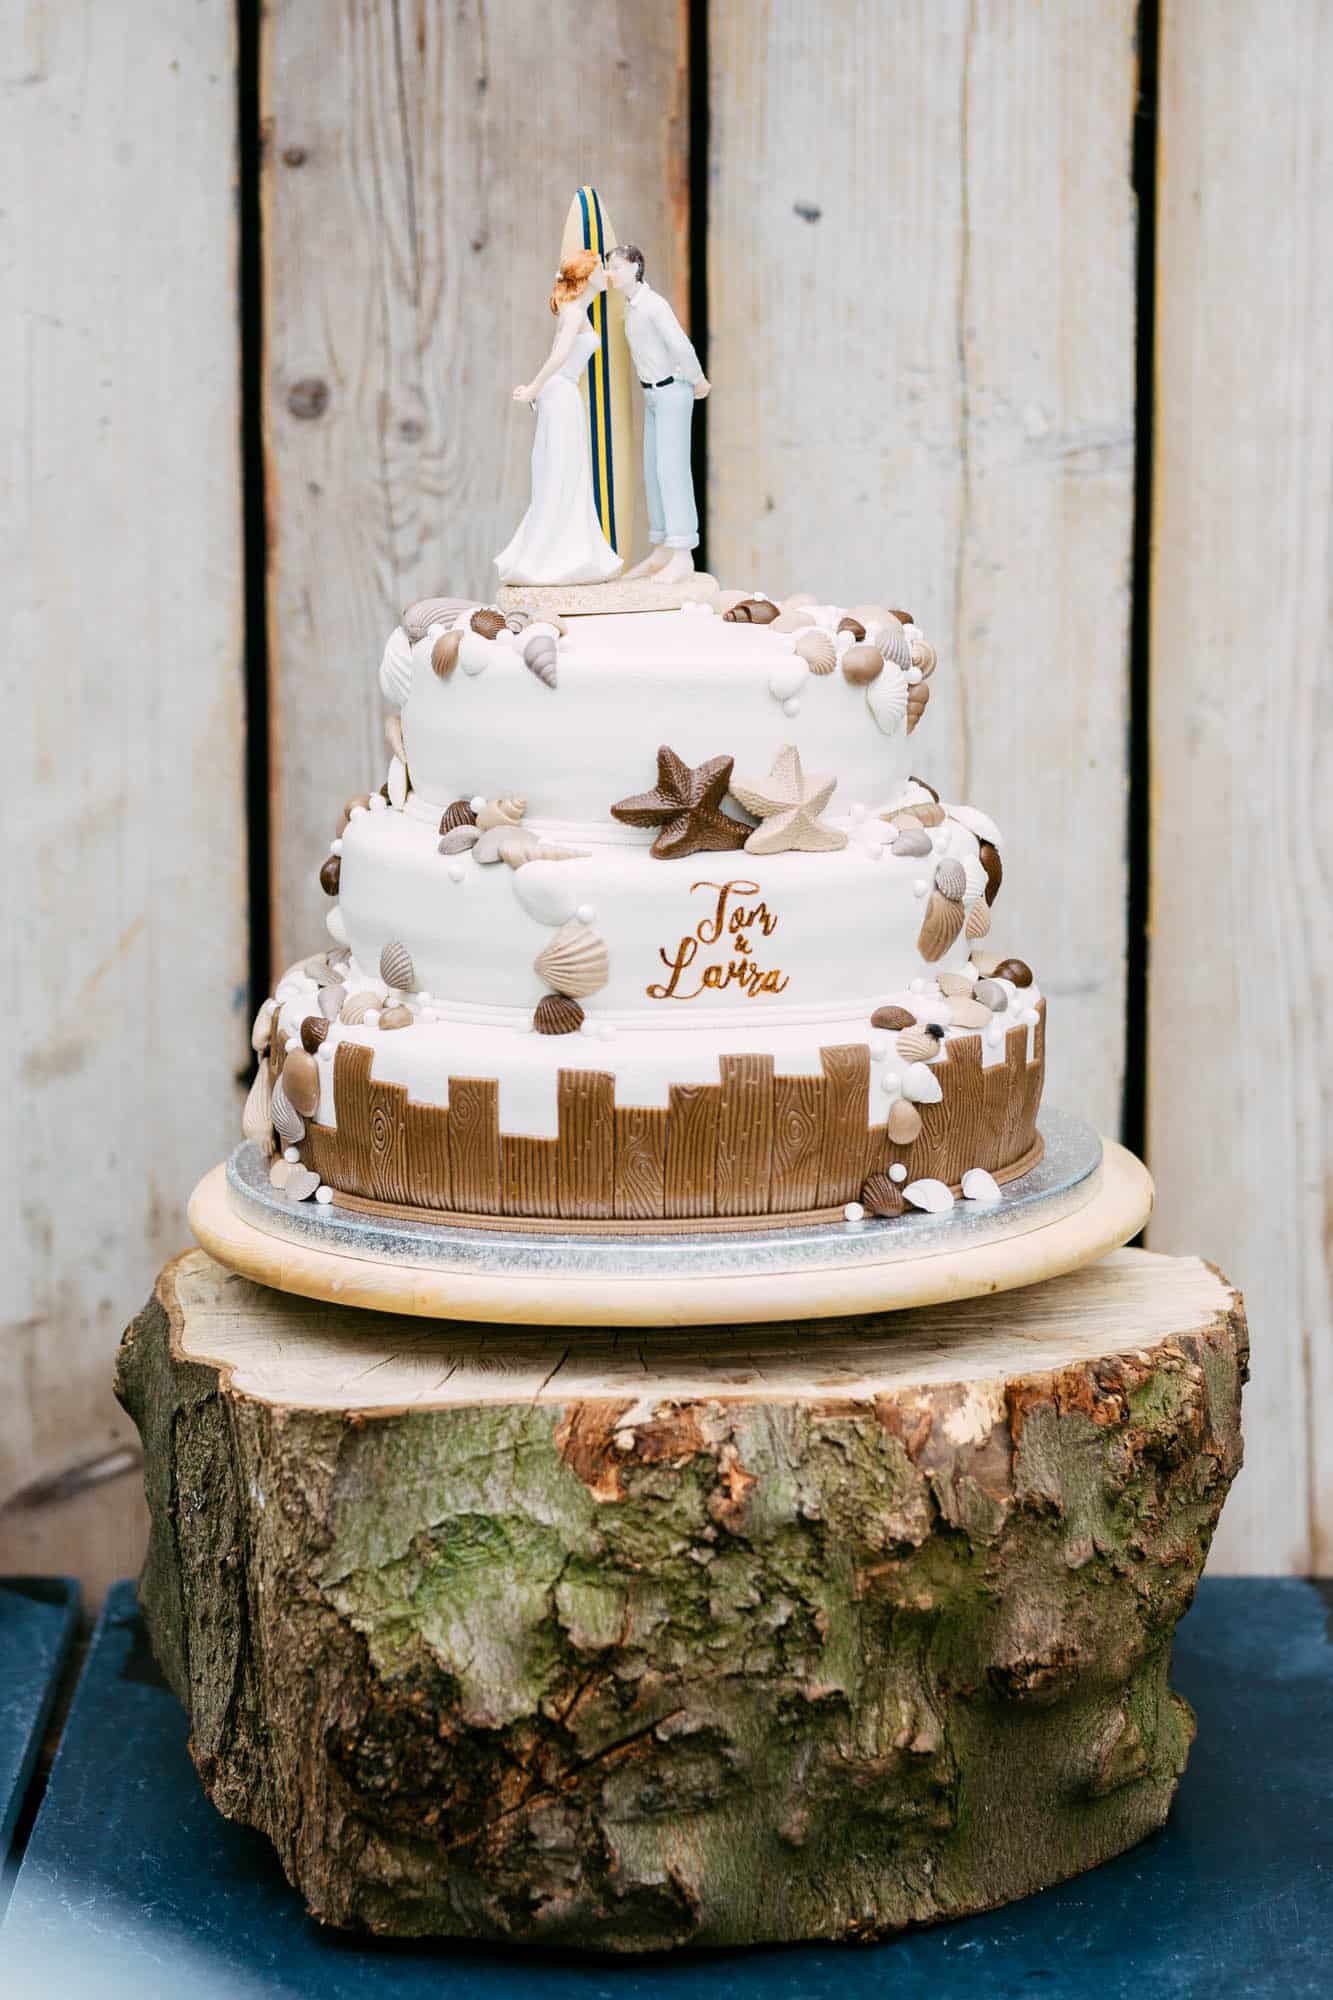     A wedding cake on top of a tree stump.